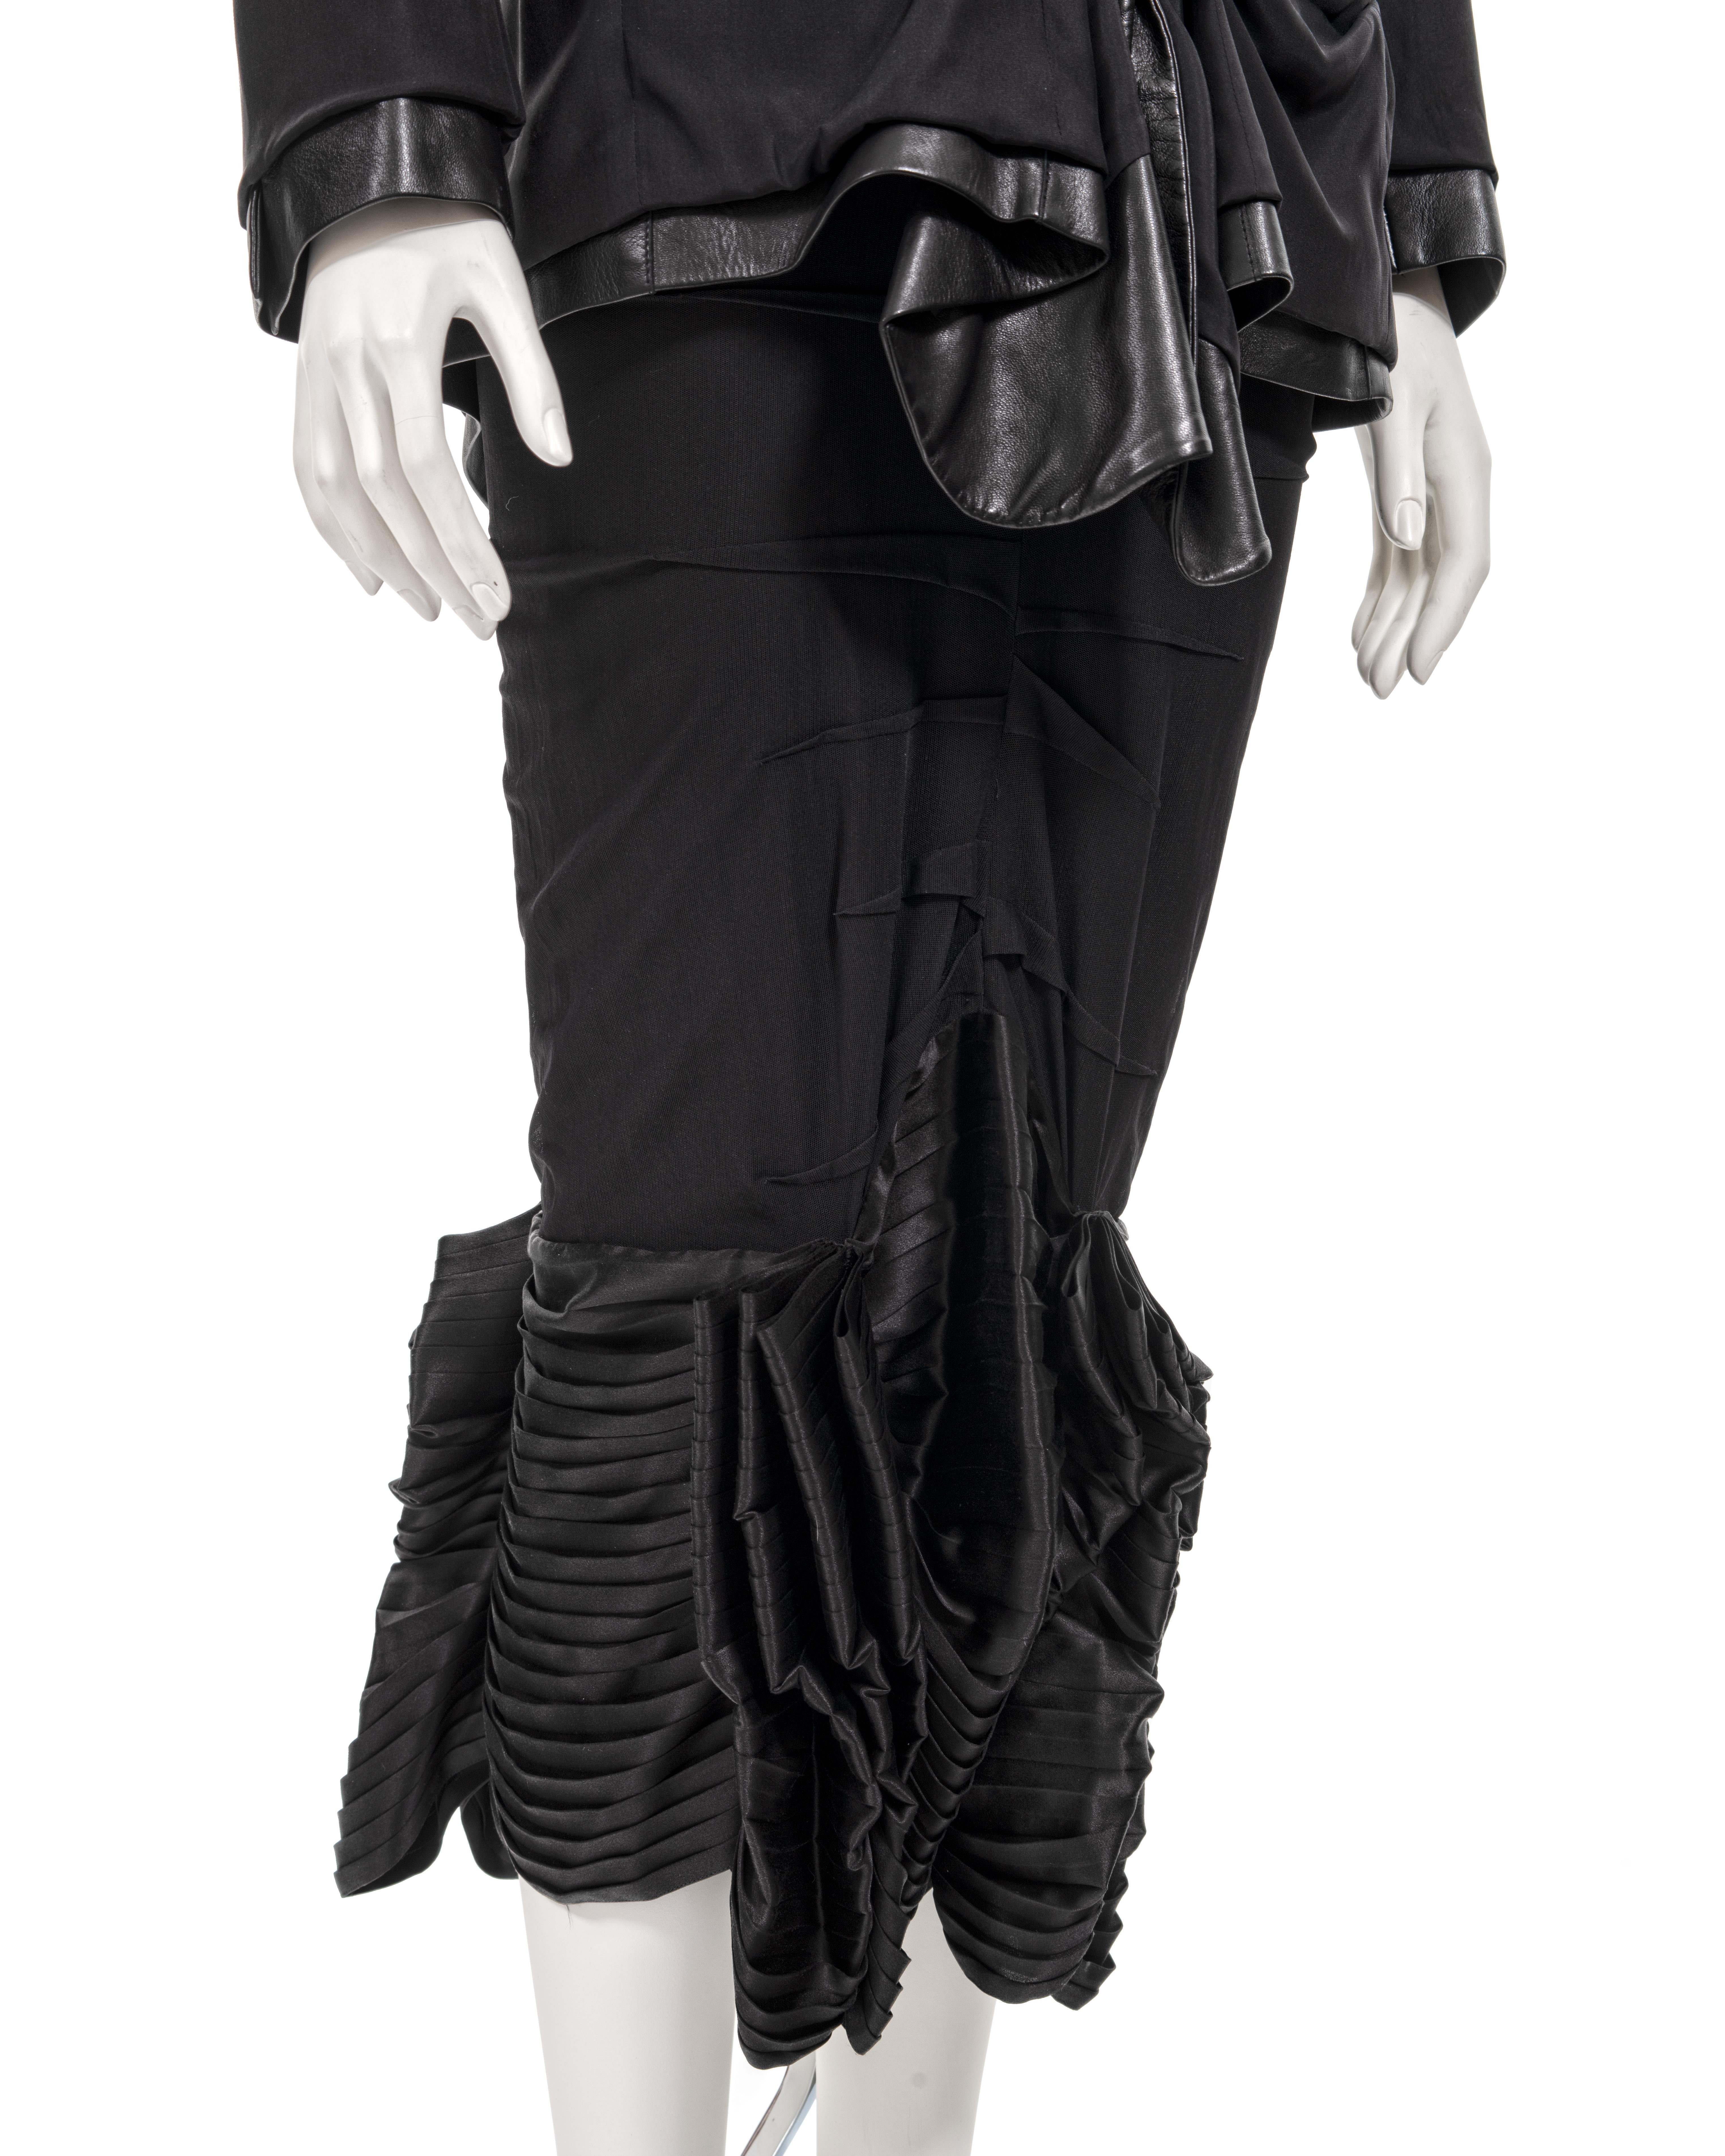 Christian Dior by John Galliano inside-out leather jacket and skirt set, ss 2003 For Sale 6